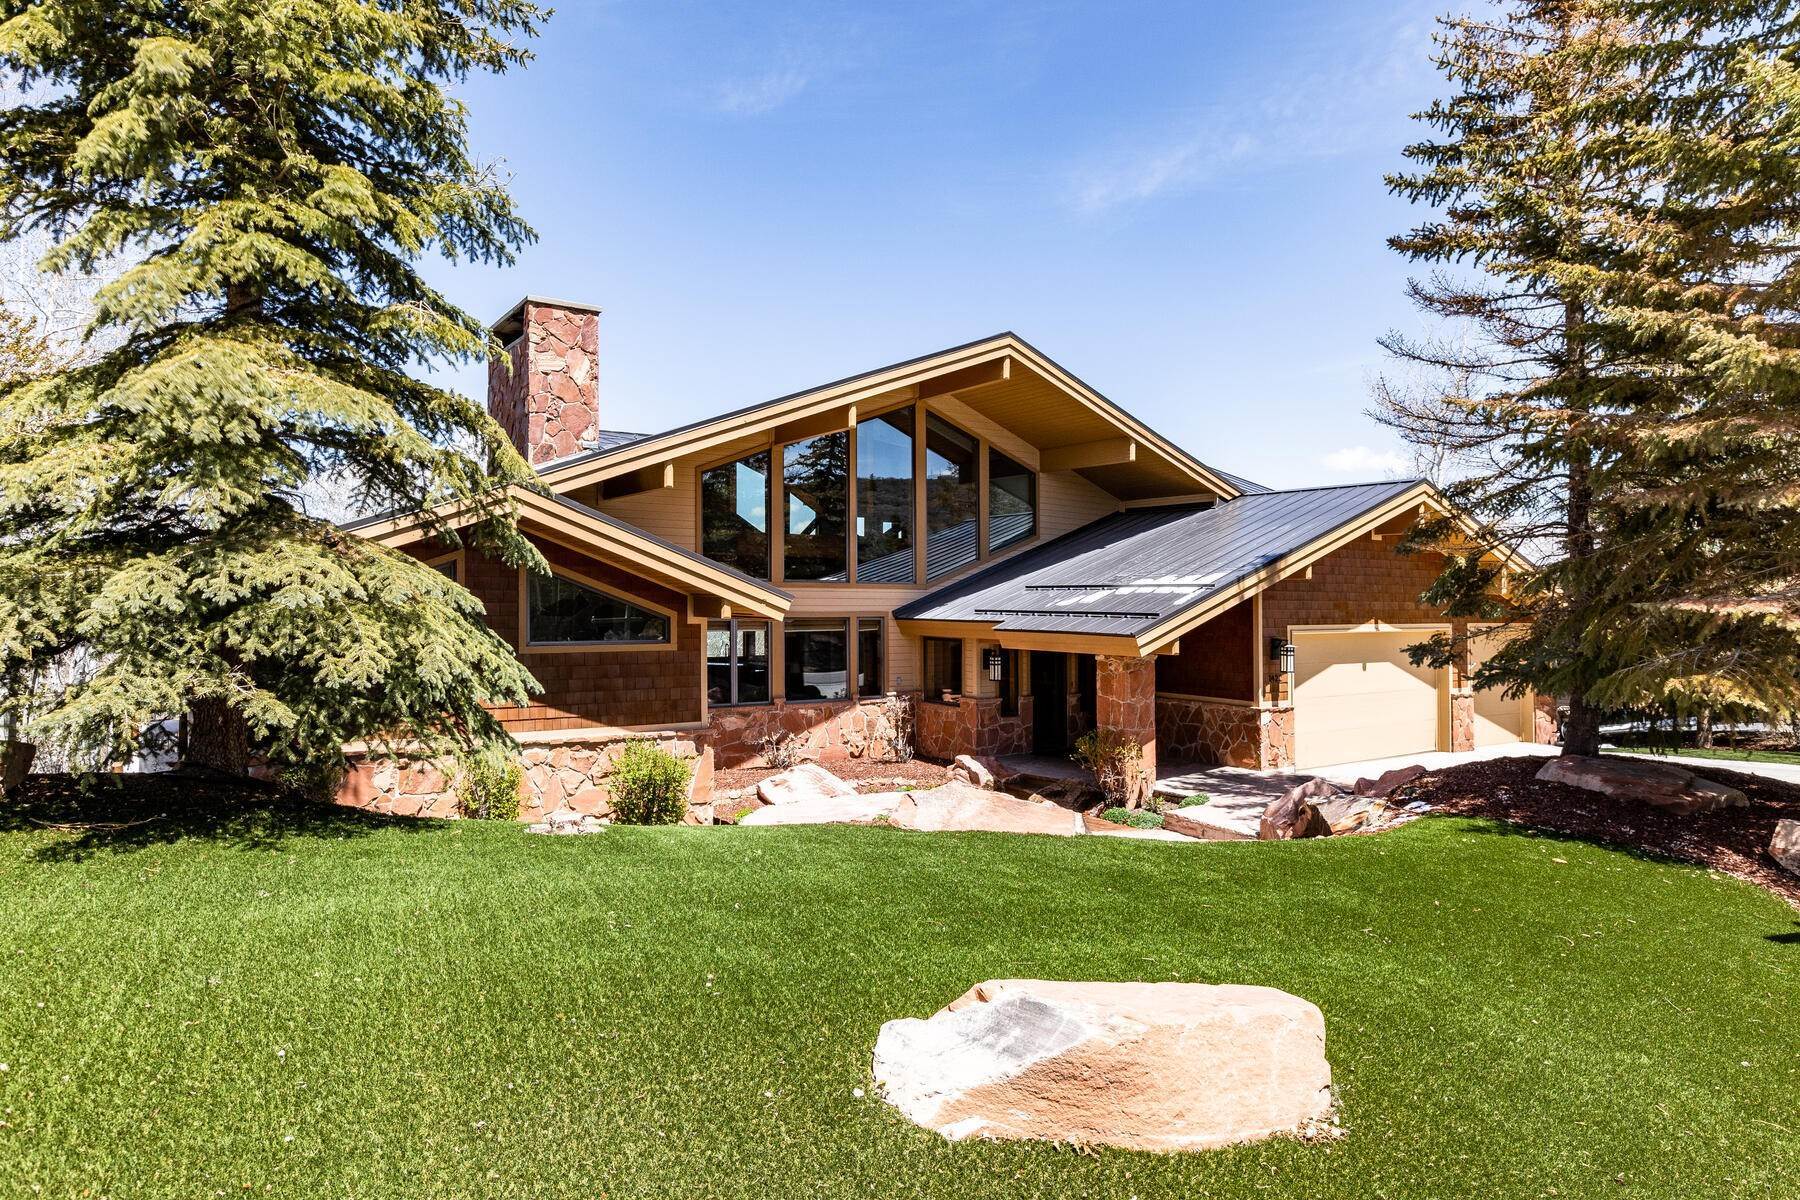 44. Single Family Homes for Sale at Exquisite Custom Home with Panoramic Views 2 minutes from the base of Park City 1422 Aerie Drive Park City, Utah 84060 United States